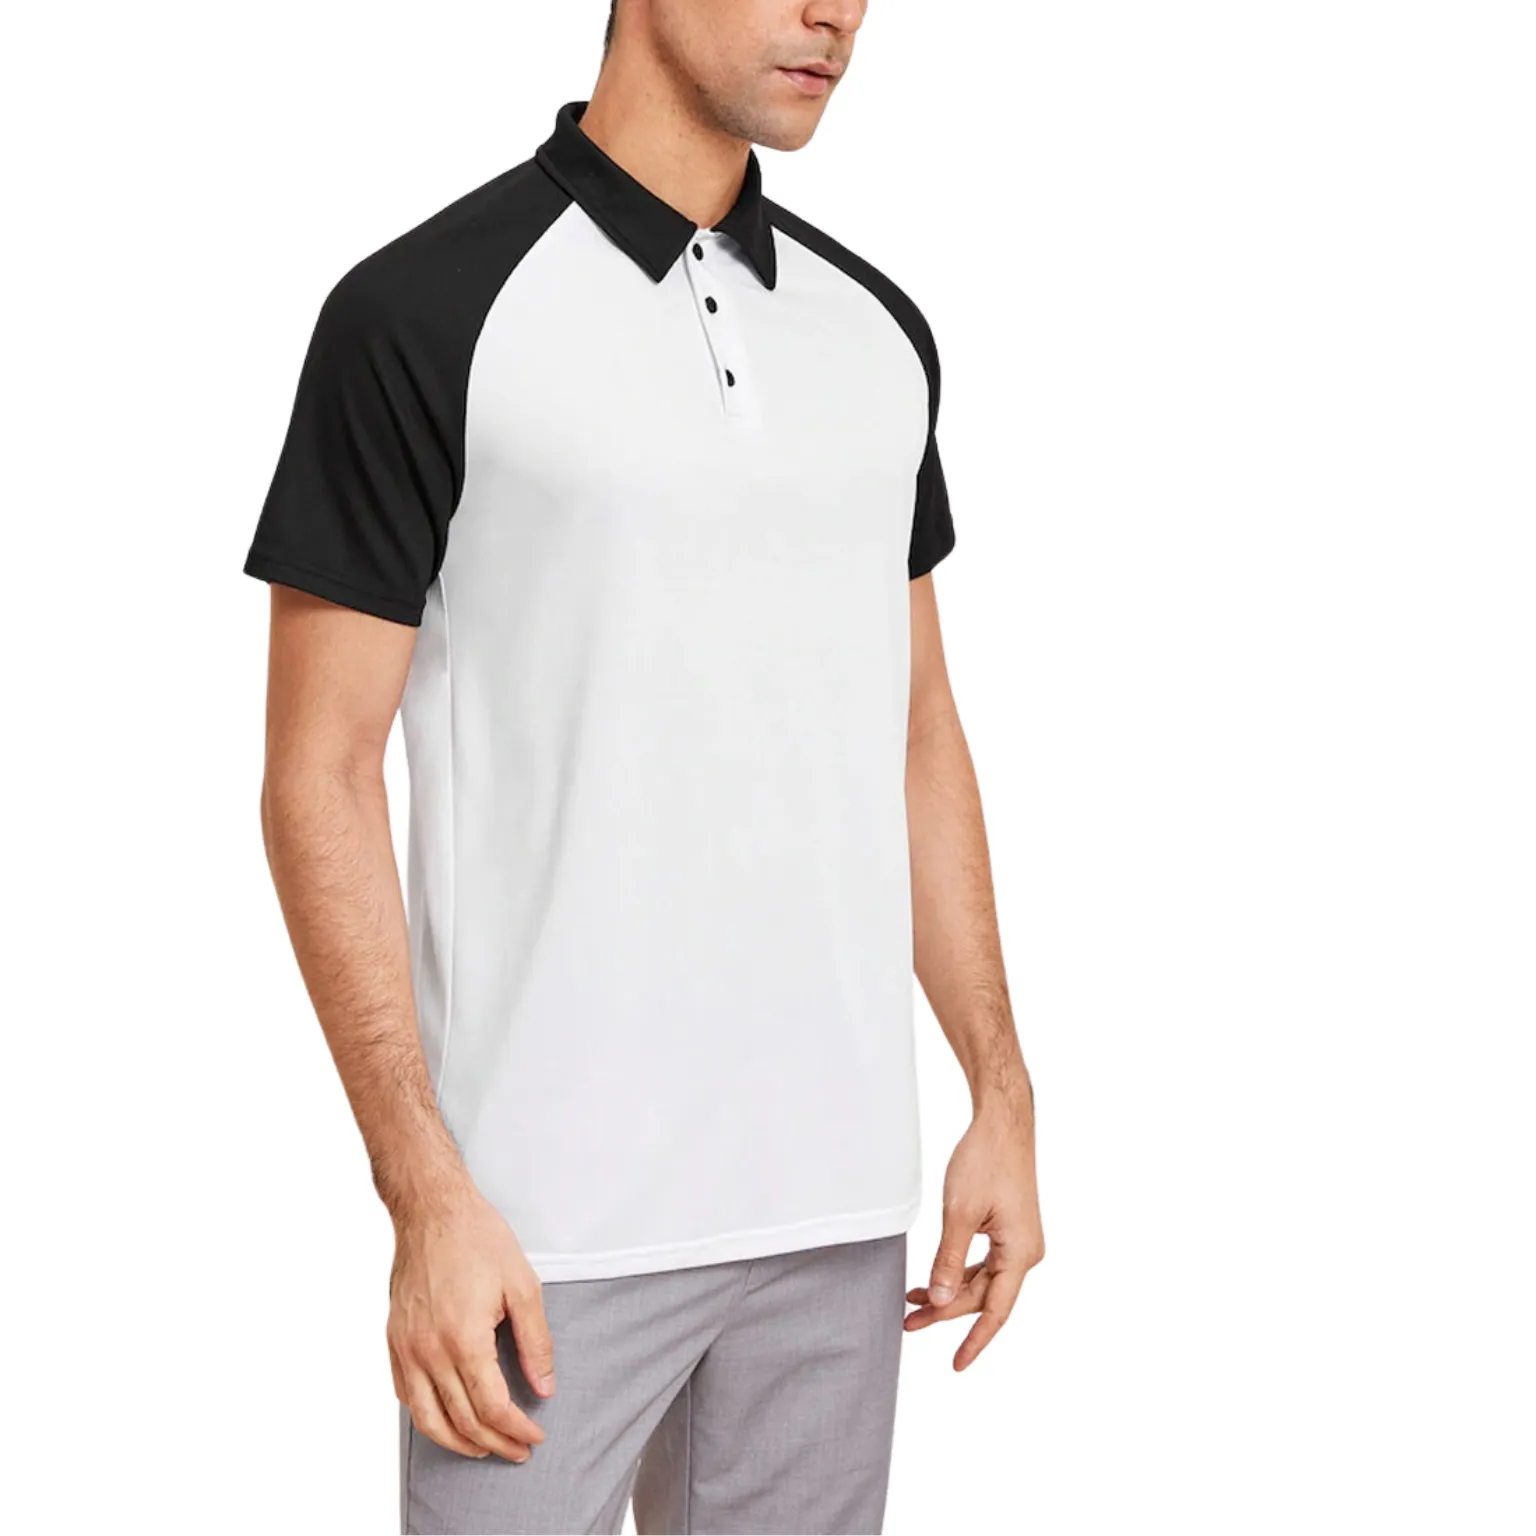 Raglan Polo Shirts manufacturing with trendy design